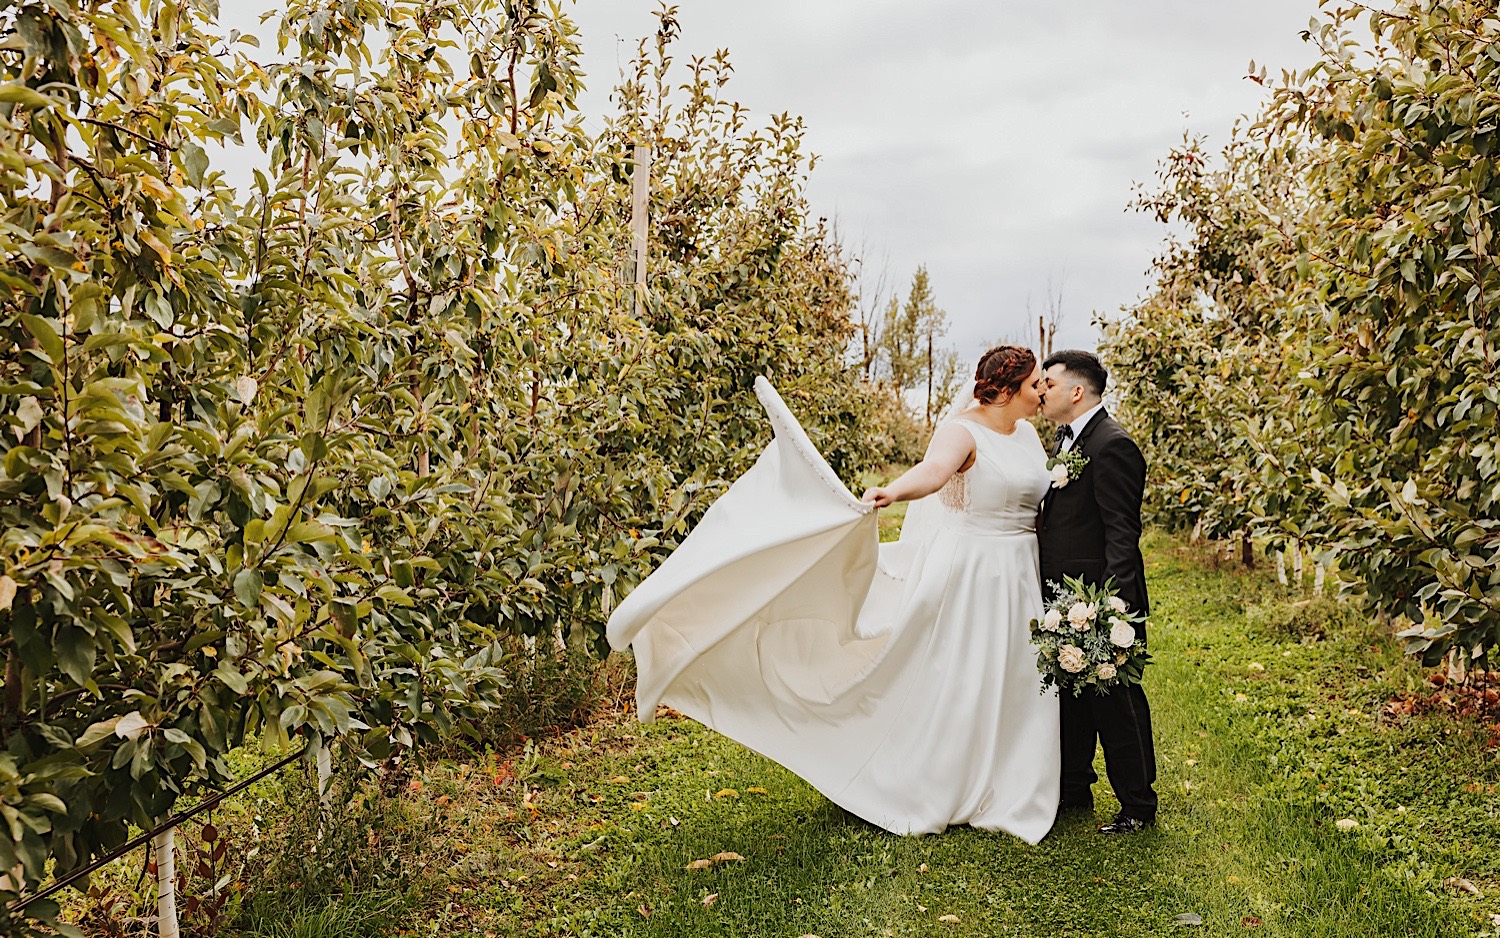 A bride and groom kiss one another while in a vineyard, photo taken by a Minnesota Wedding Photographer